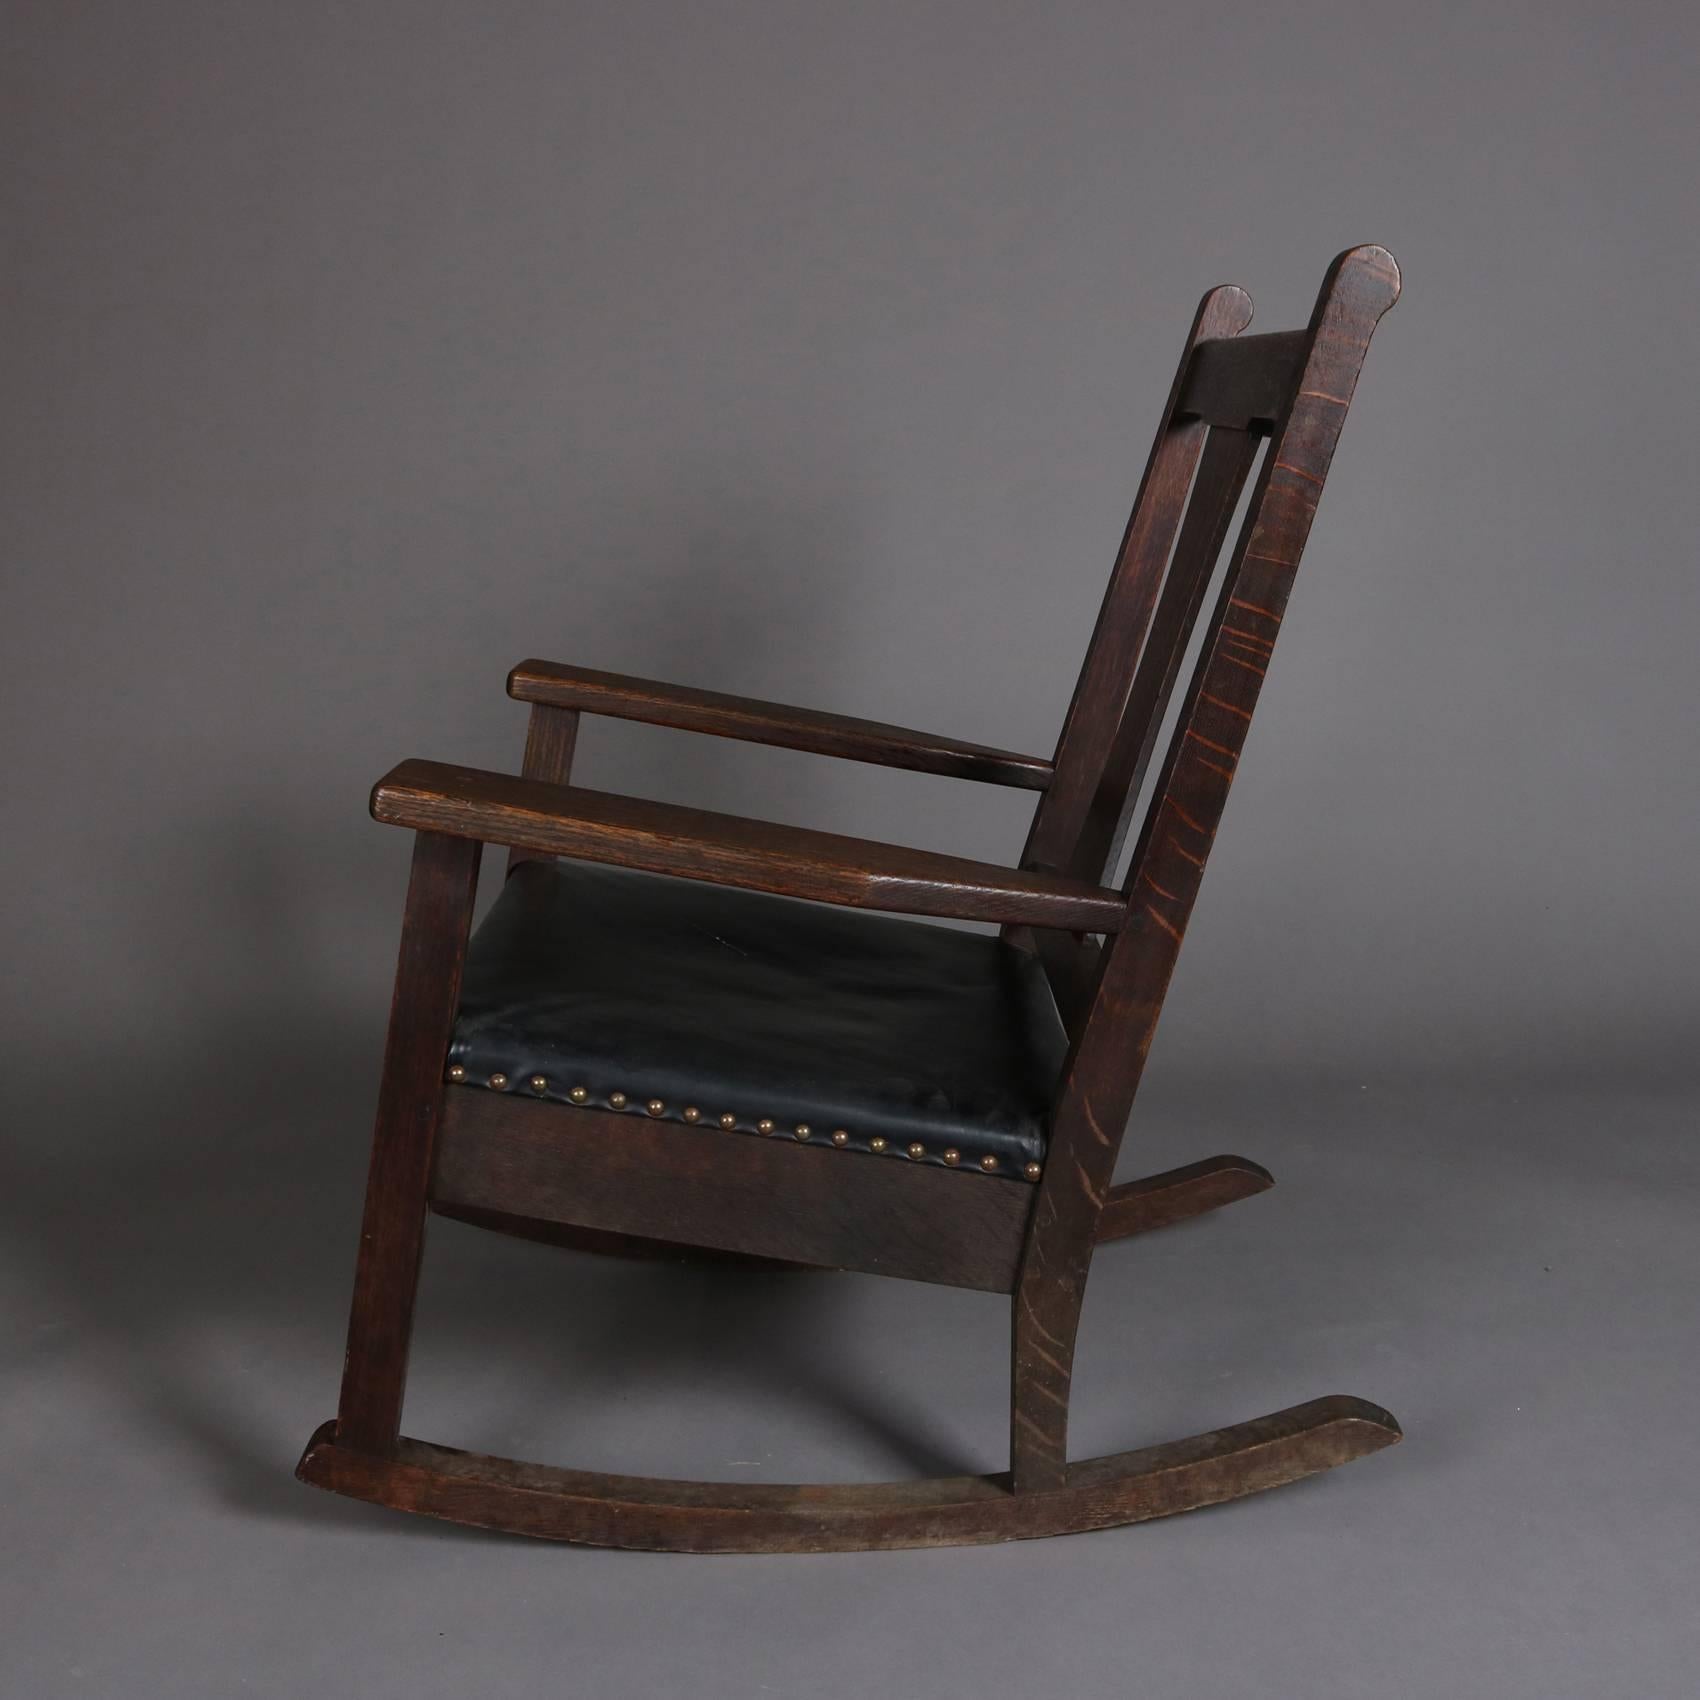 American Antique Arts & Crafts Mission Oak Rocking Chair by Roycroft, Signed